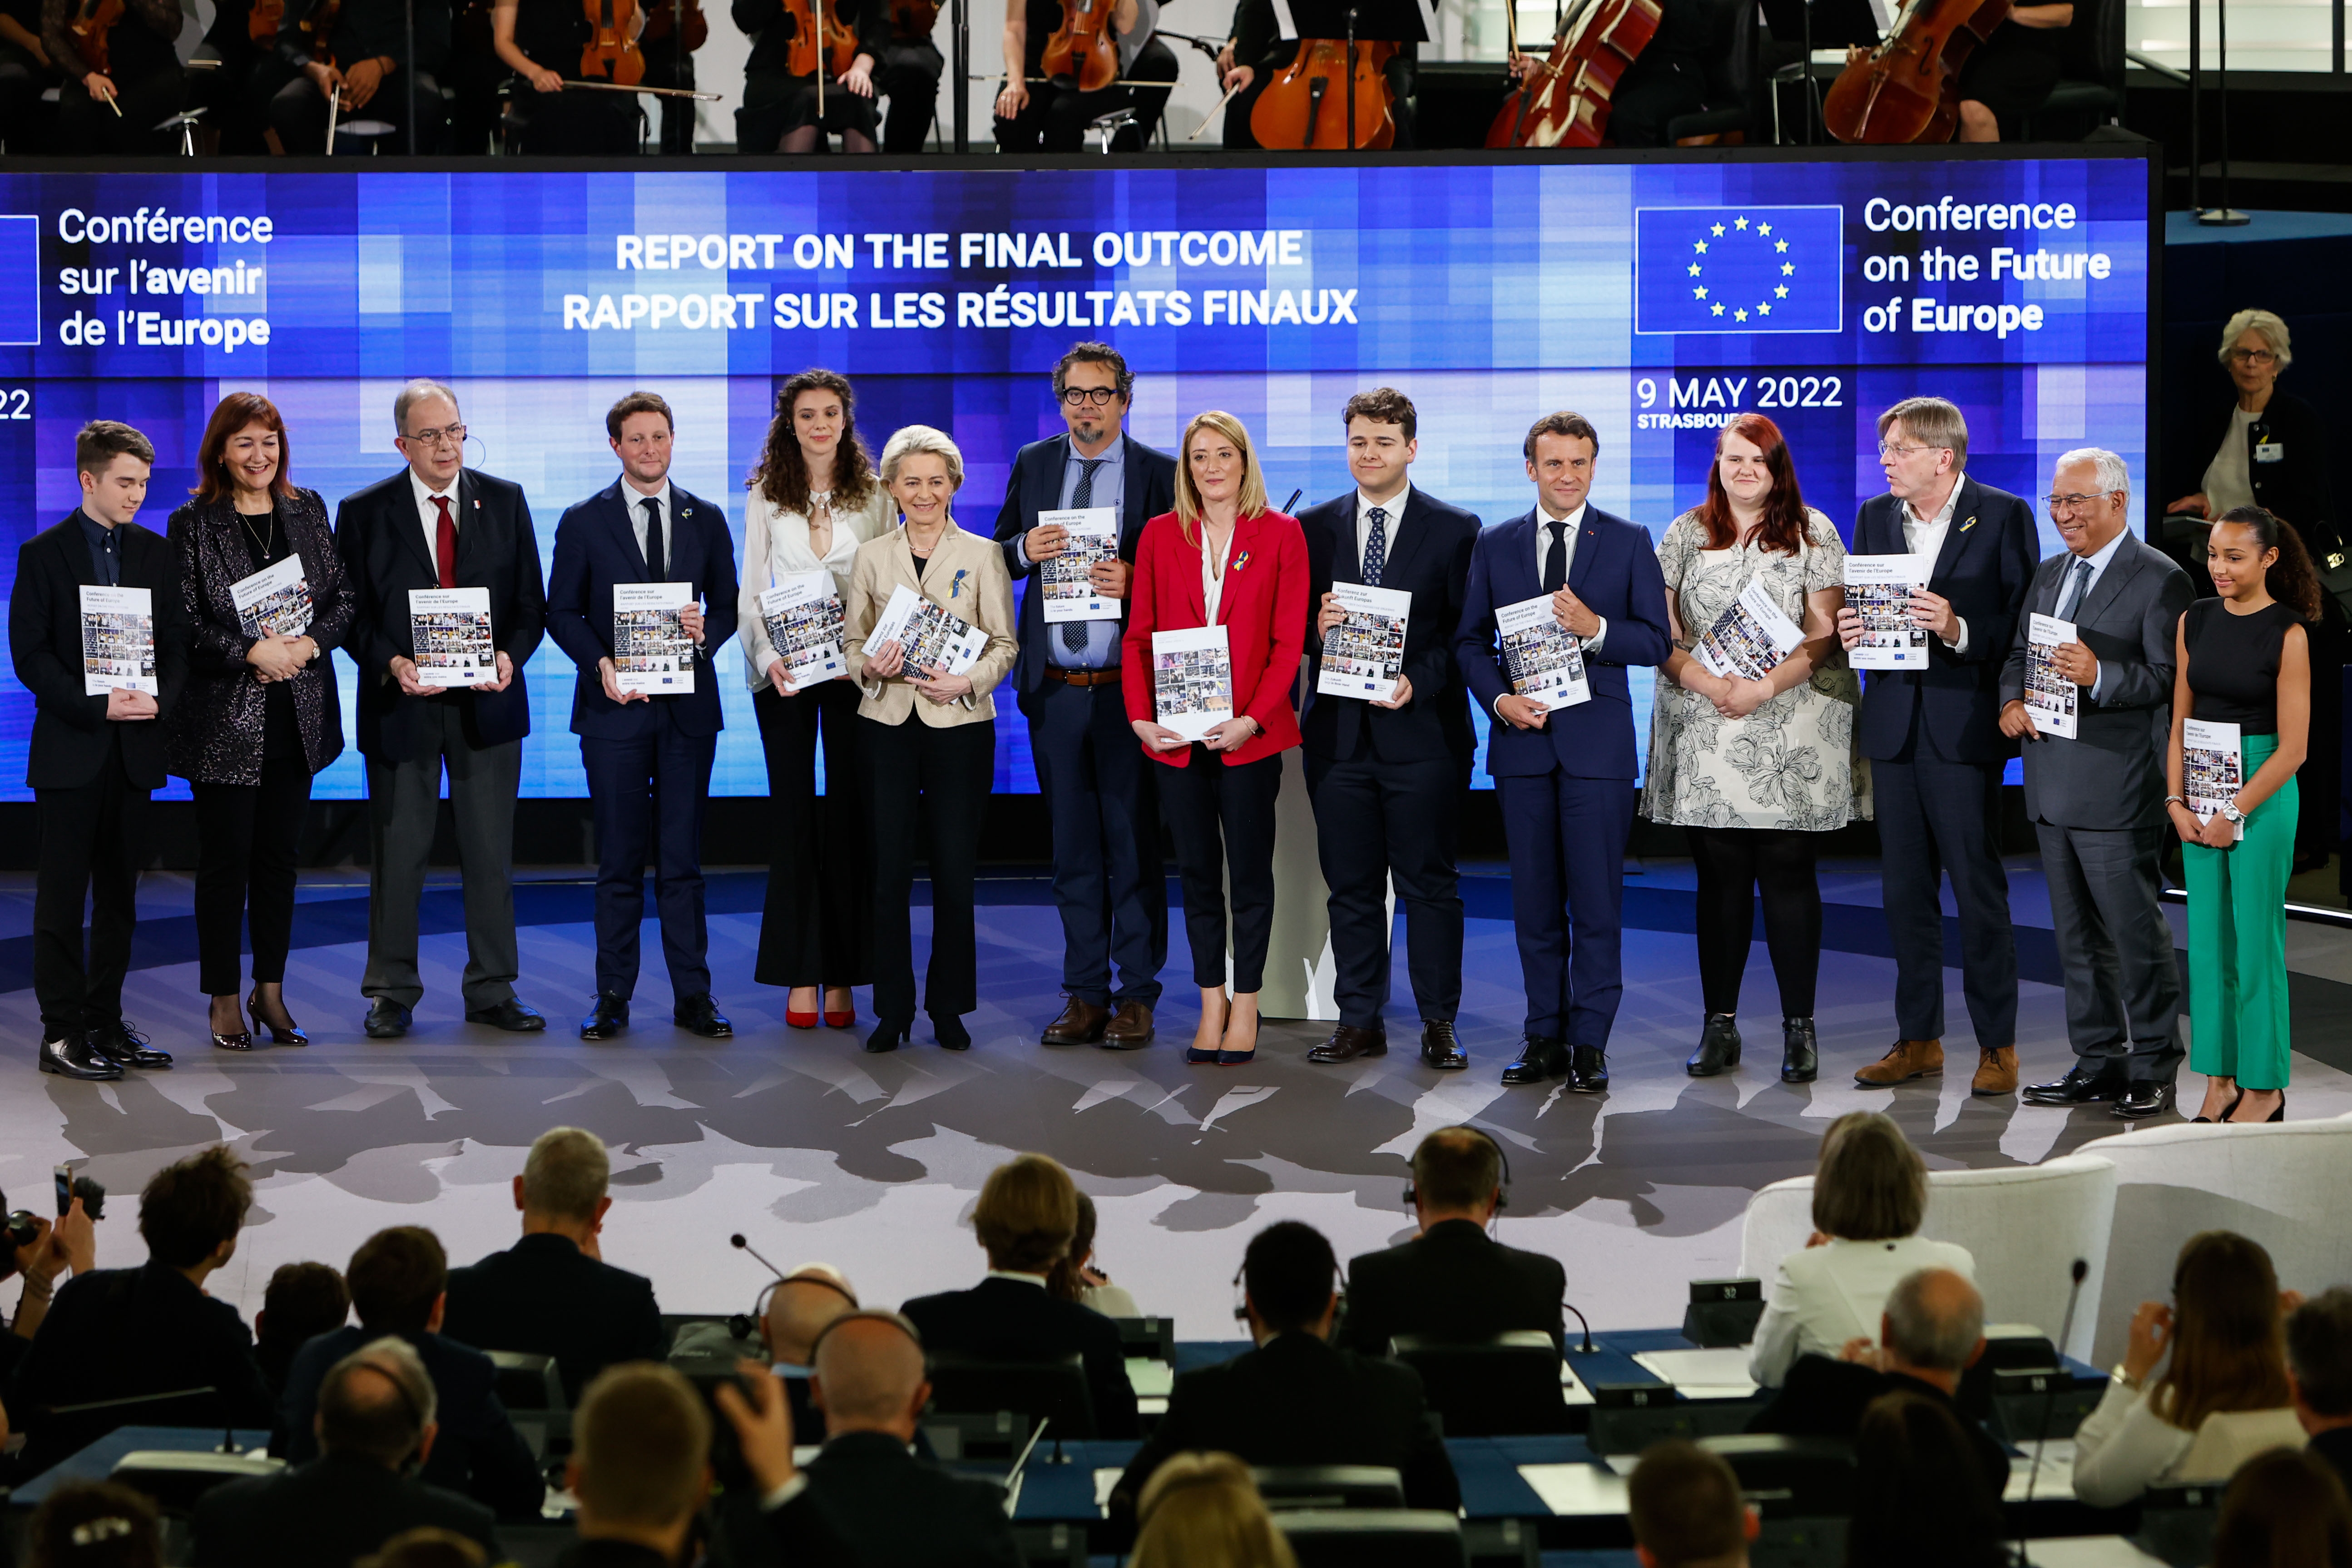 The Conference on the Future of Europe settled its work